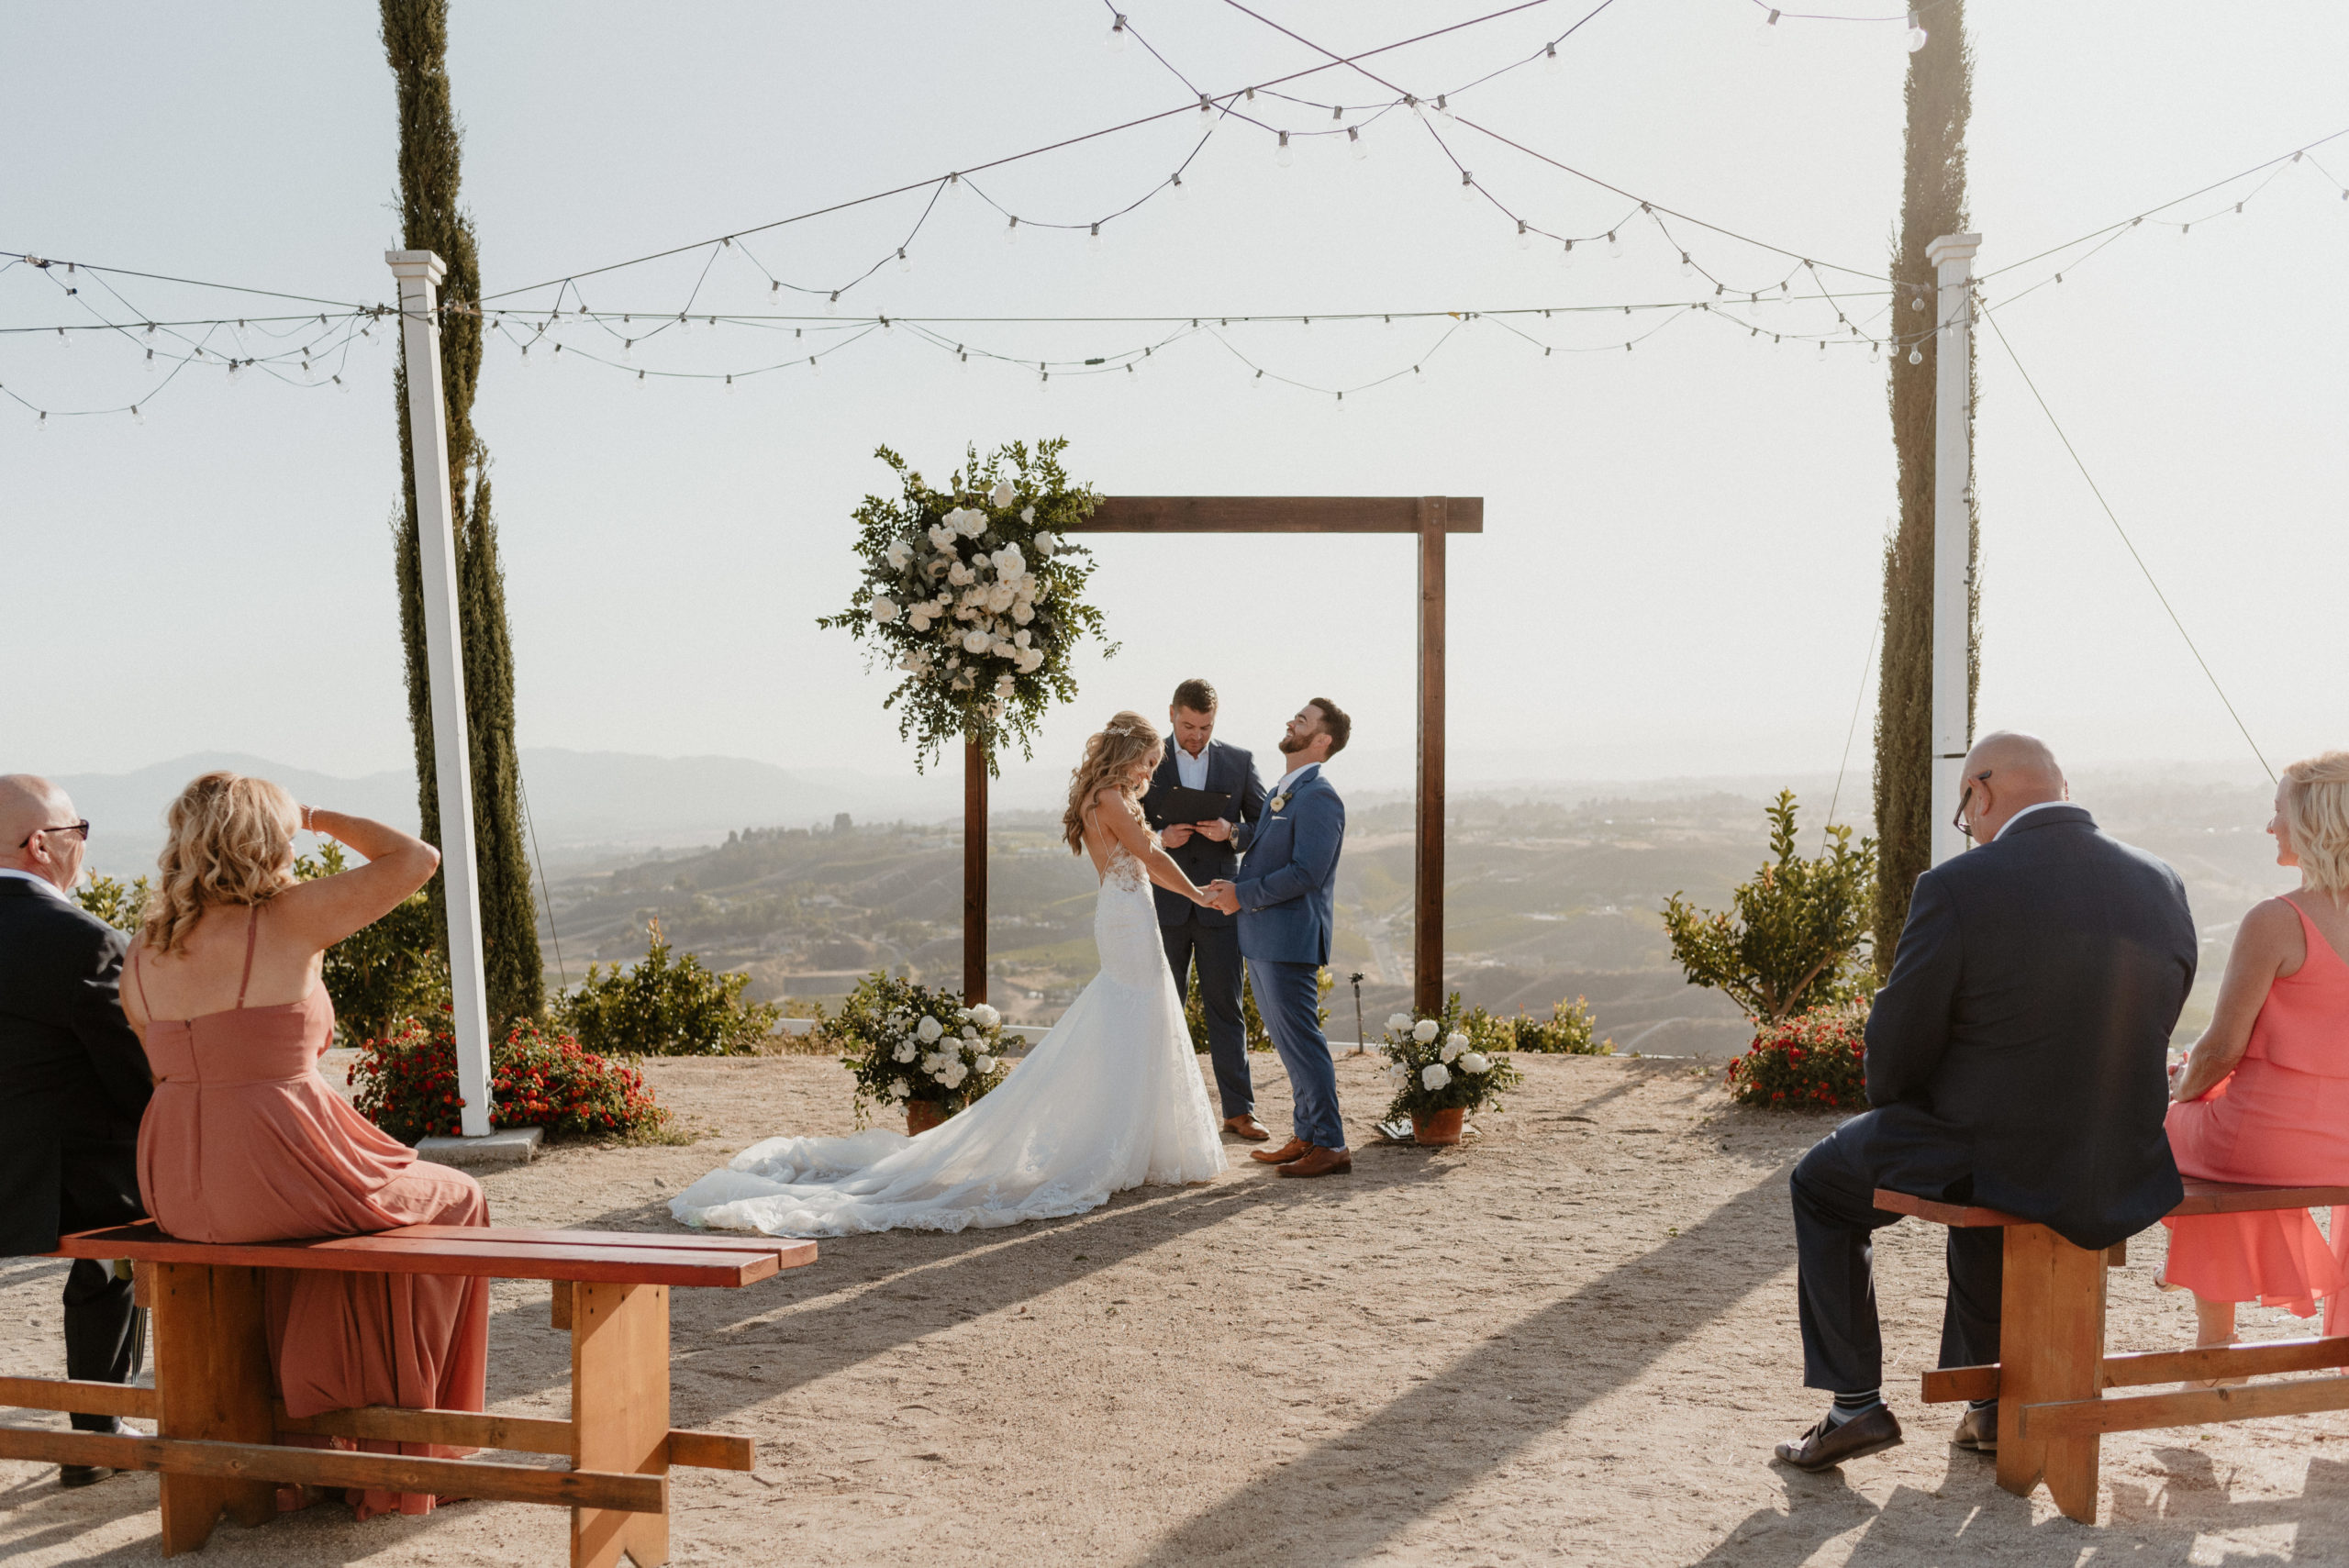 An intimate elopement ceremony in Temecula, CA.